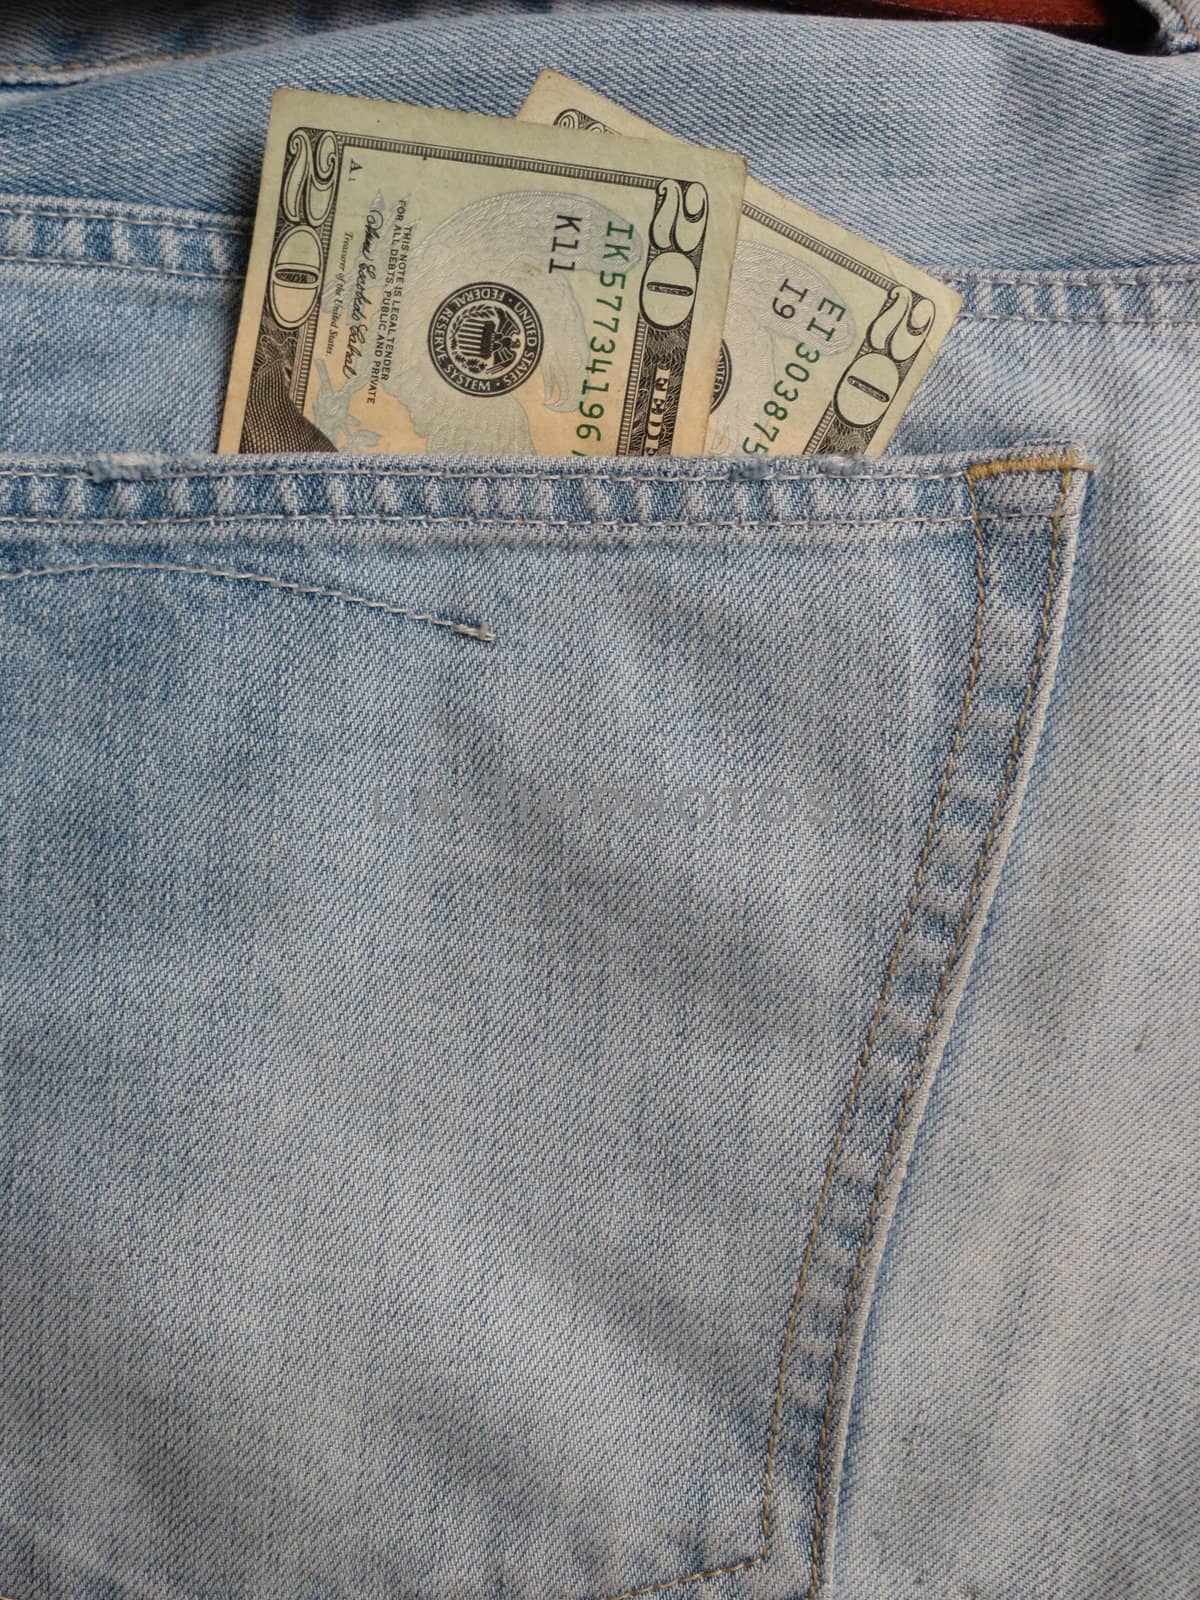 USD notes in blue jeans pocket by paolo77